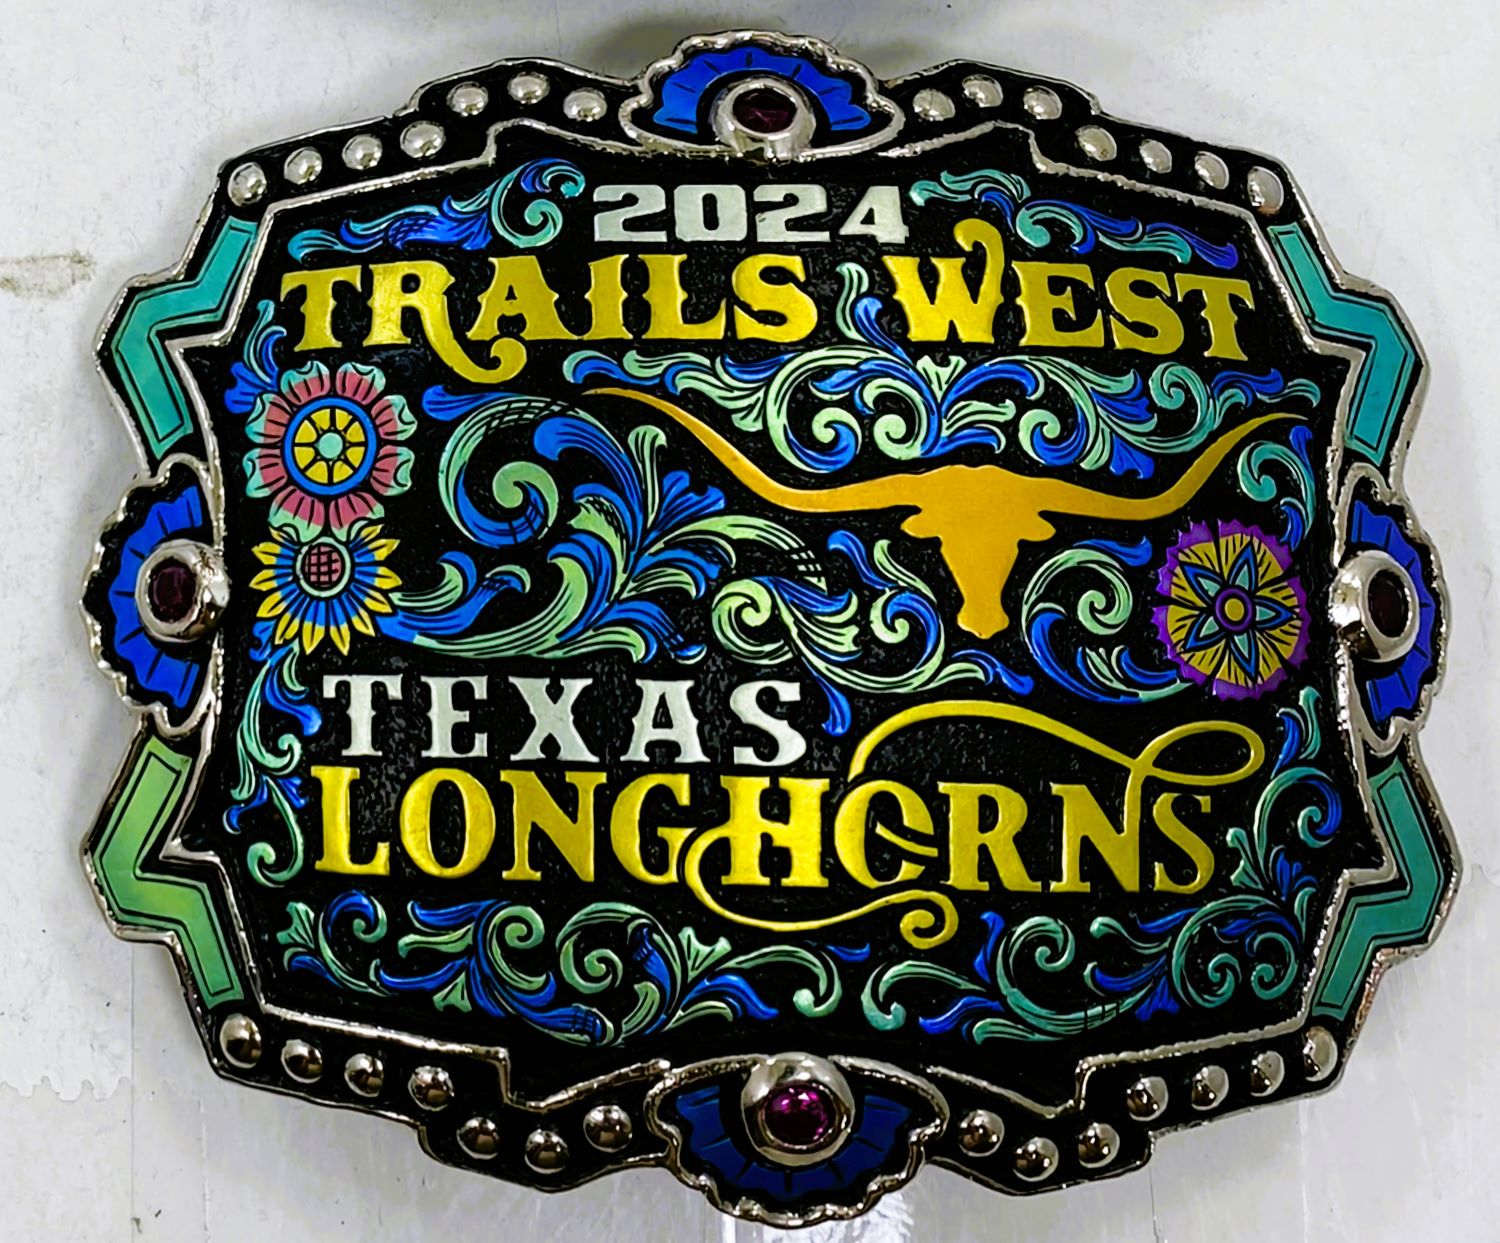 2024 Trails West buckle